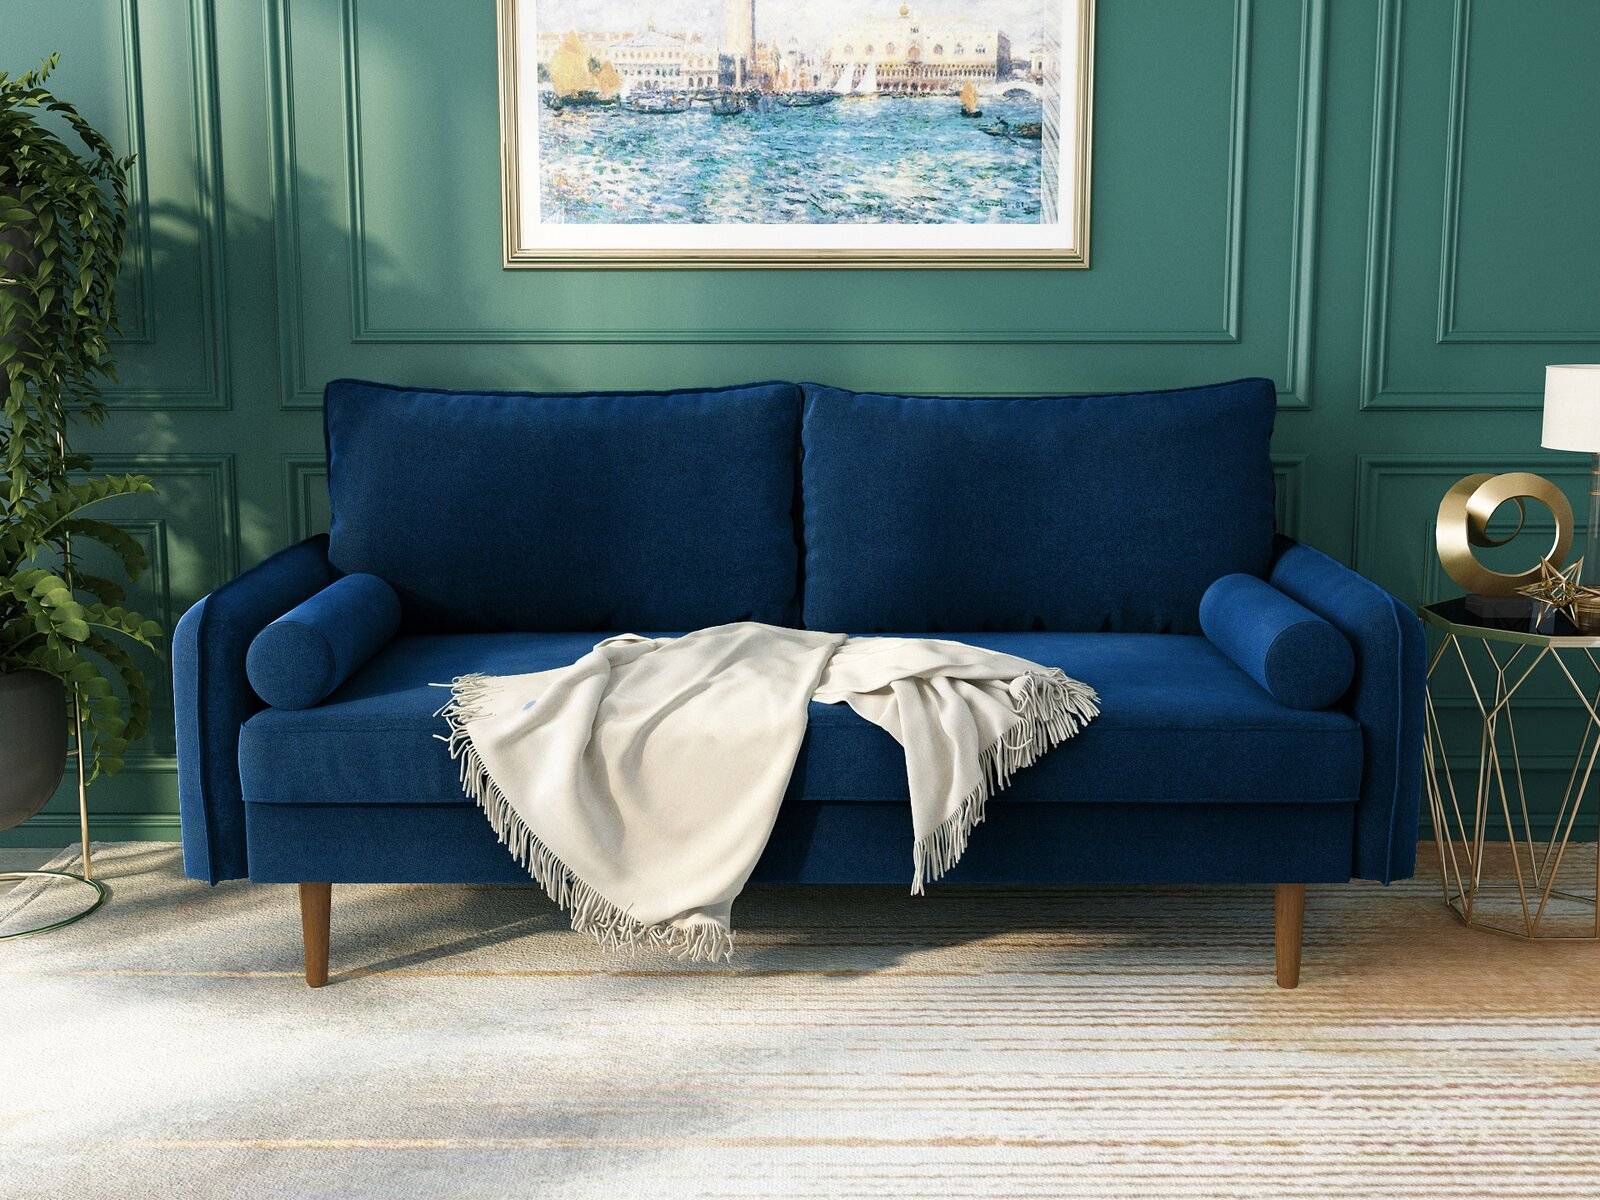 22 ways to style blue velvet sofa in a living room - a house in